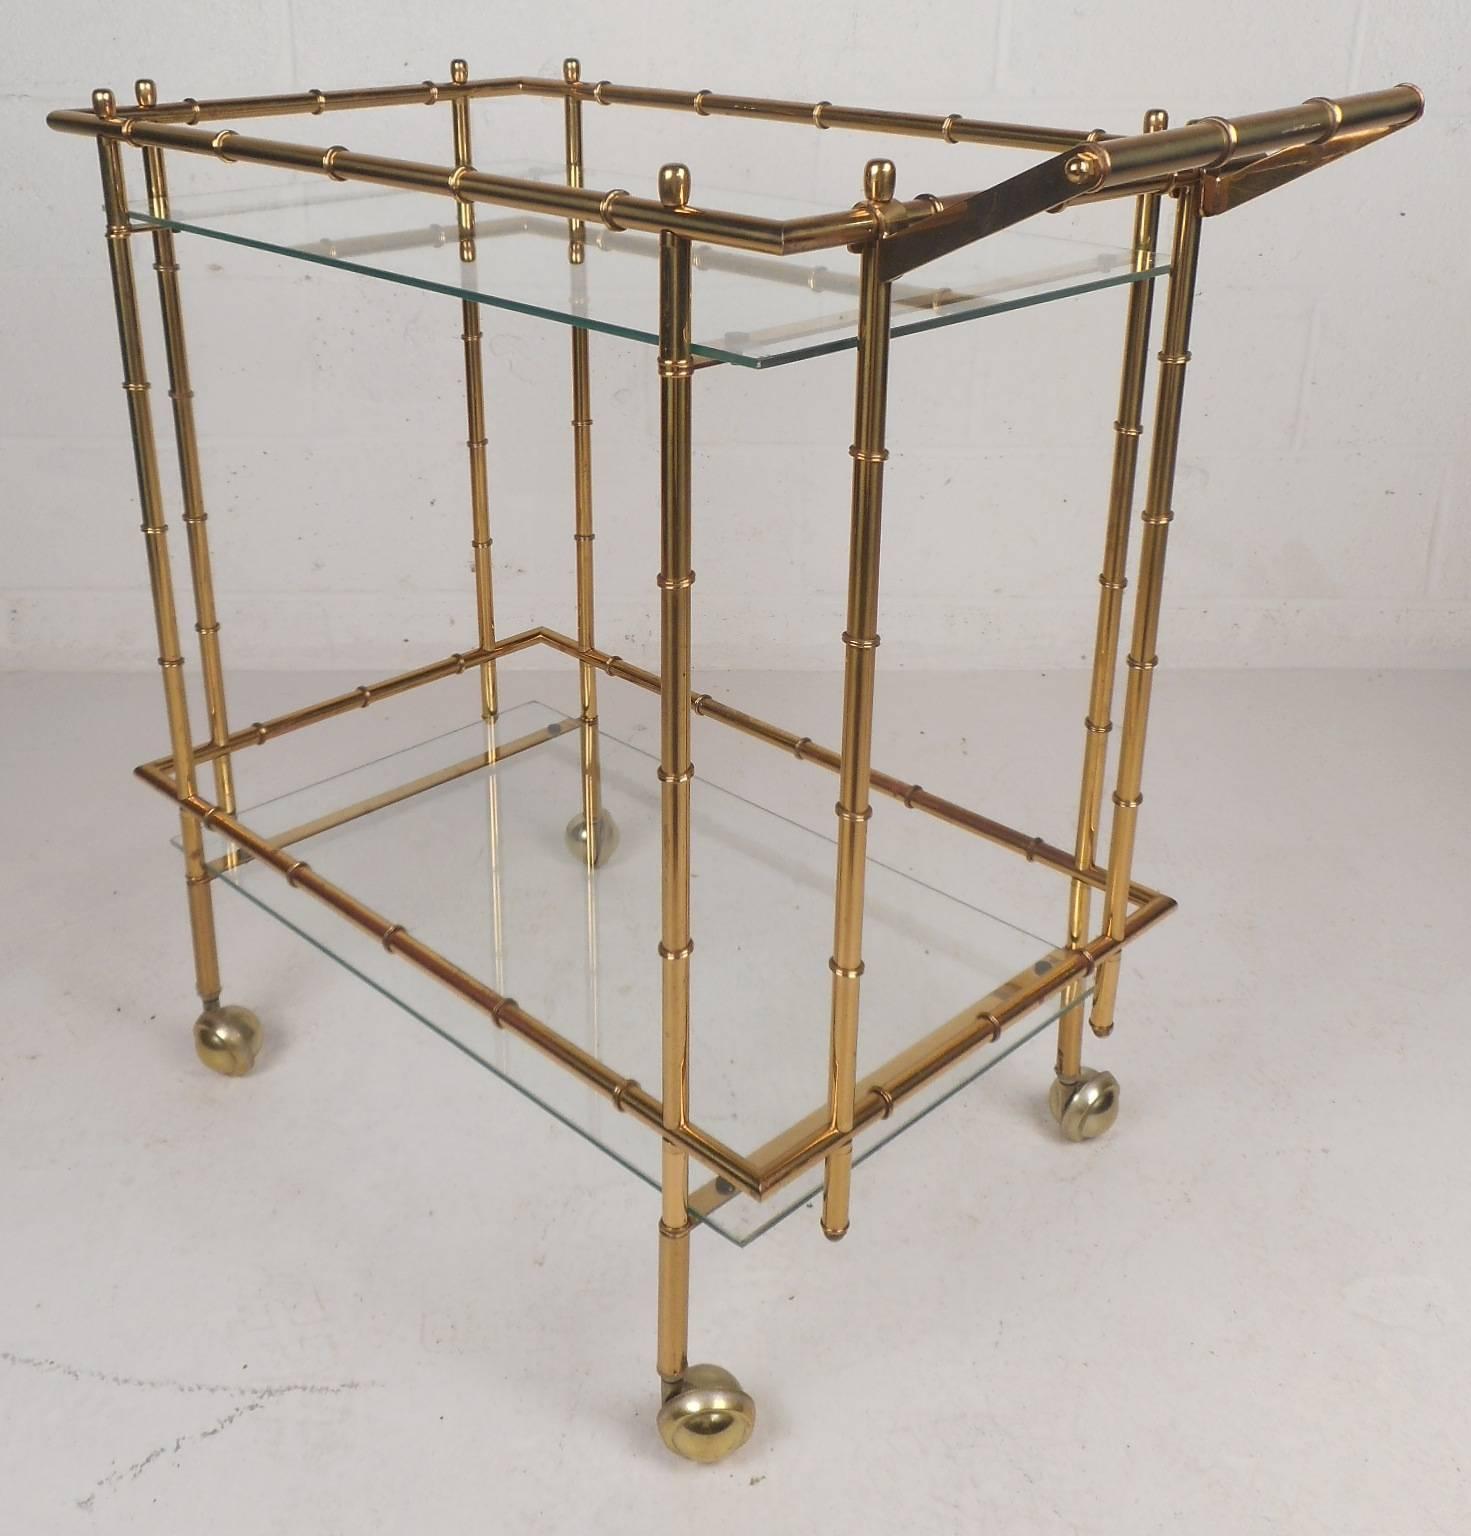 Elegant vintage modern serving car features a faux bamboo brass frame on castors. Unique design with two rectangular glass shelves for placing items. This beautiful Mid-Century piece makes the perfect addition to any home, business, or office.